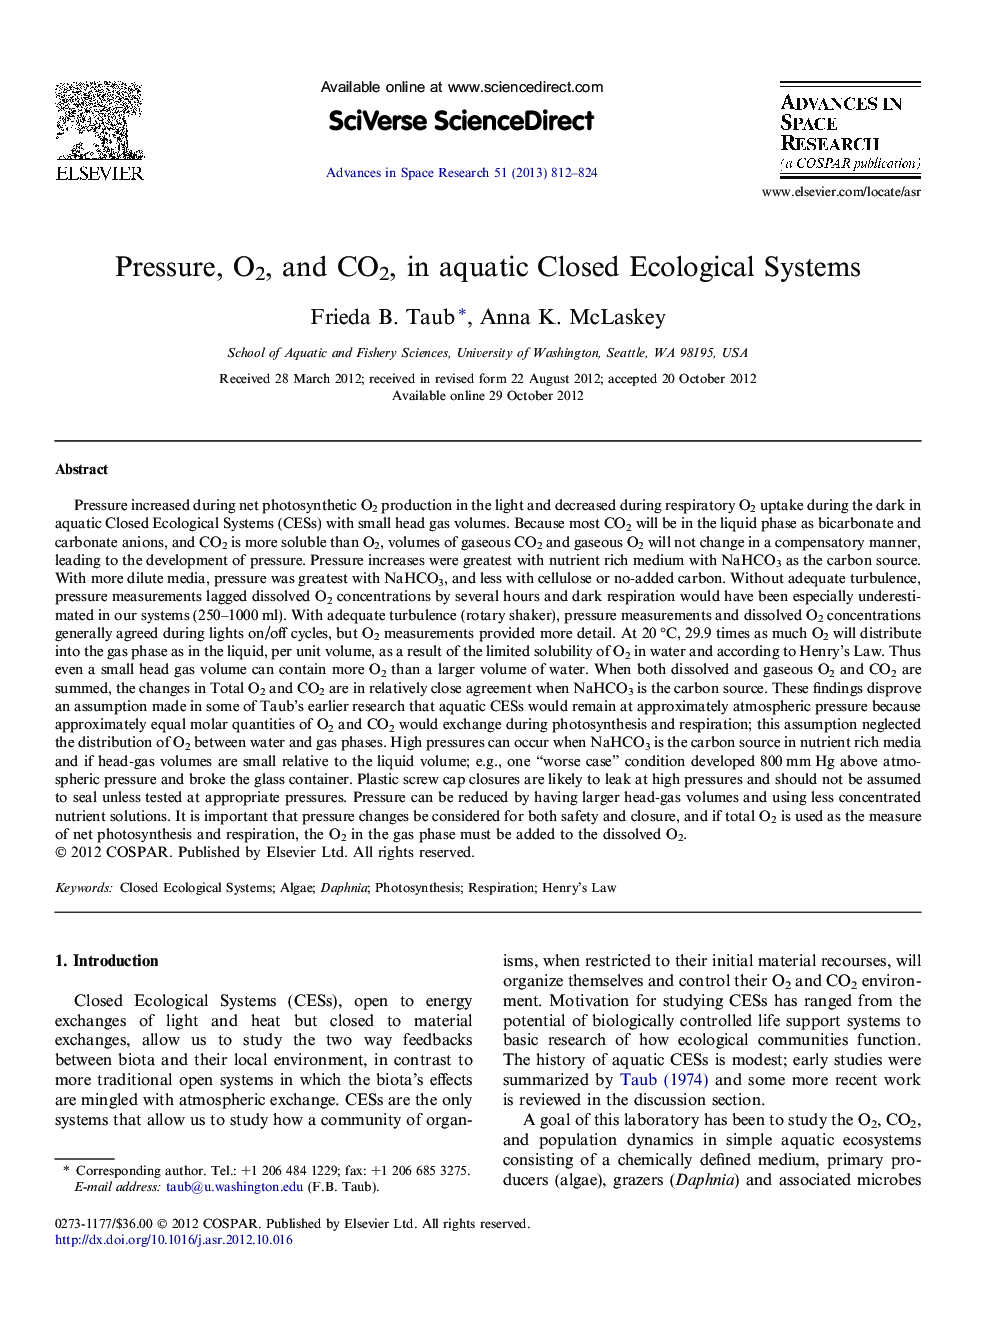 Pressure, O2, and CO2, in aquatic Closed Ecological Systems